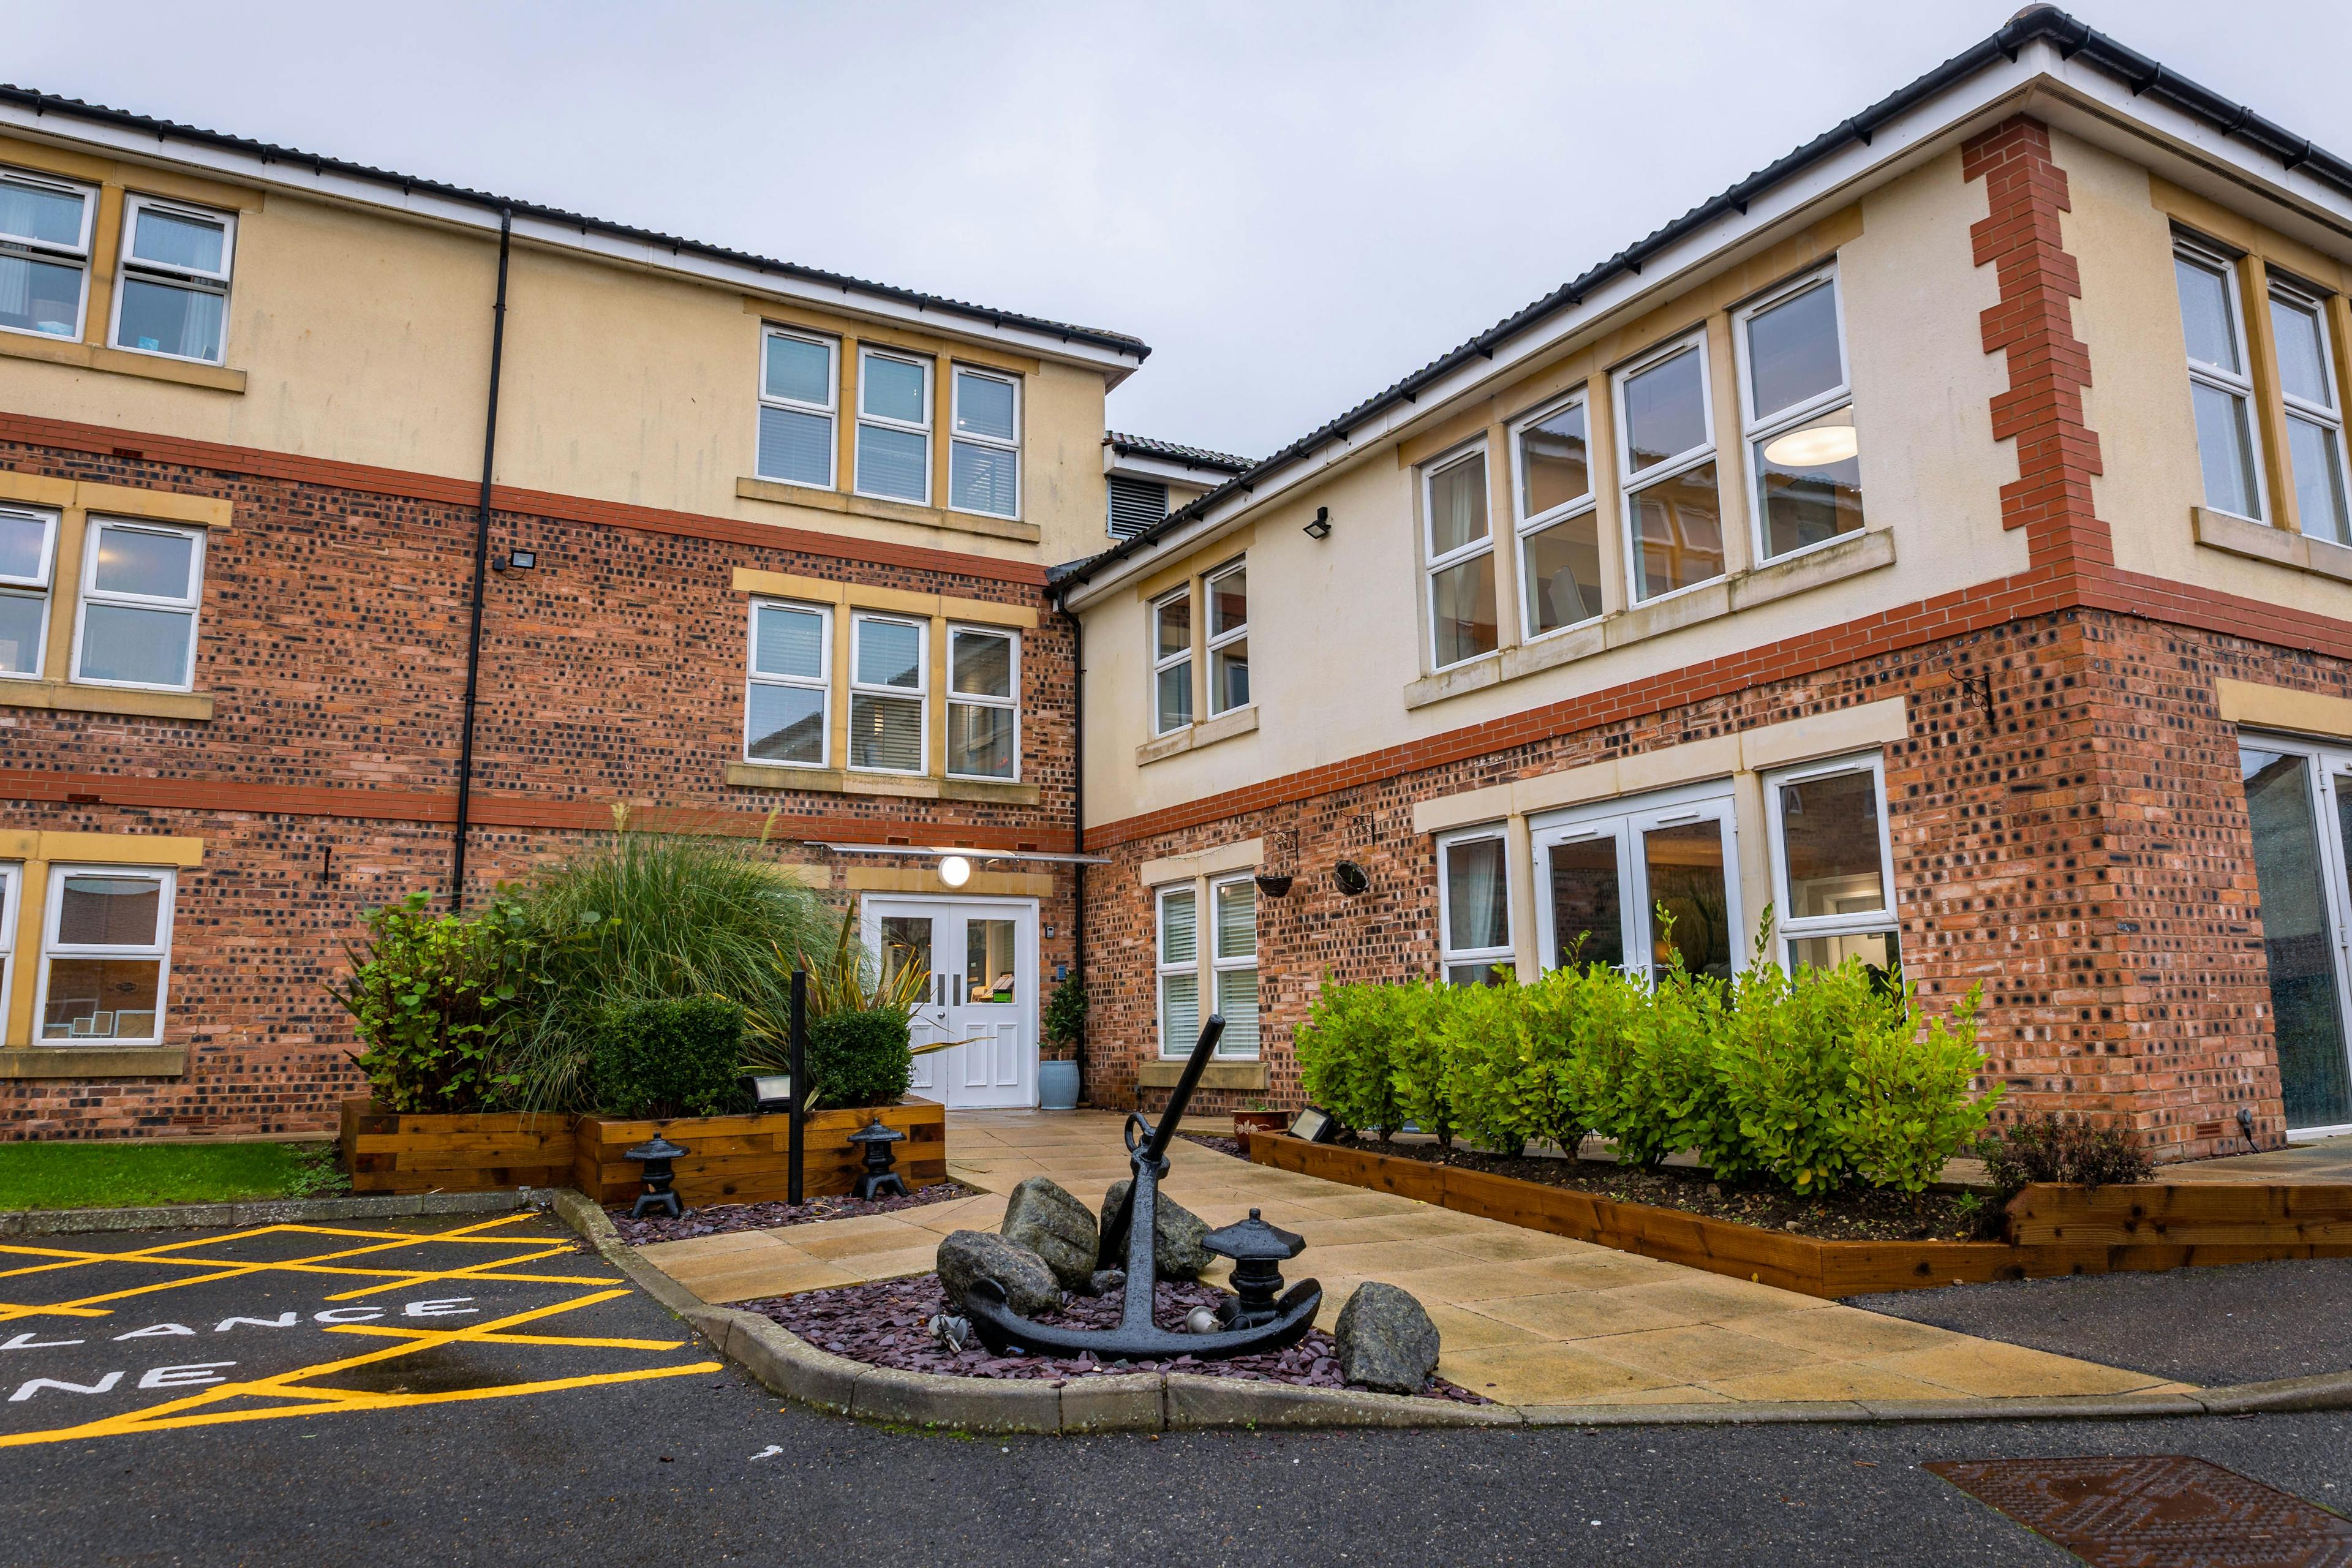 Exterior of Scarborough Hall Care Home in Scarborough, North Yorkshire